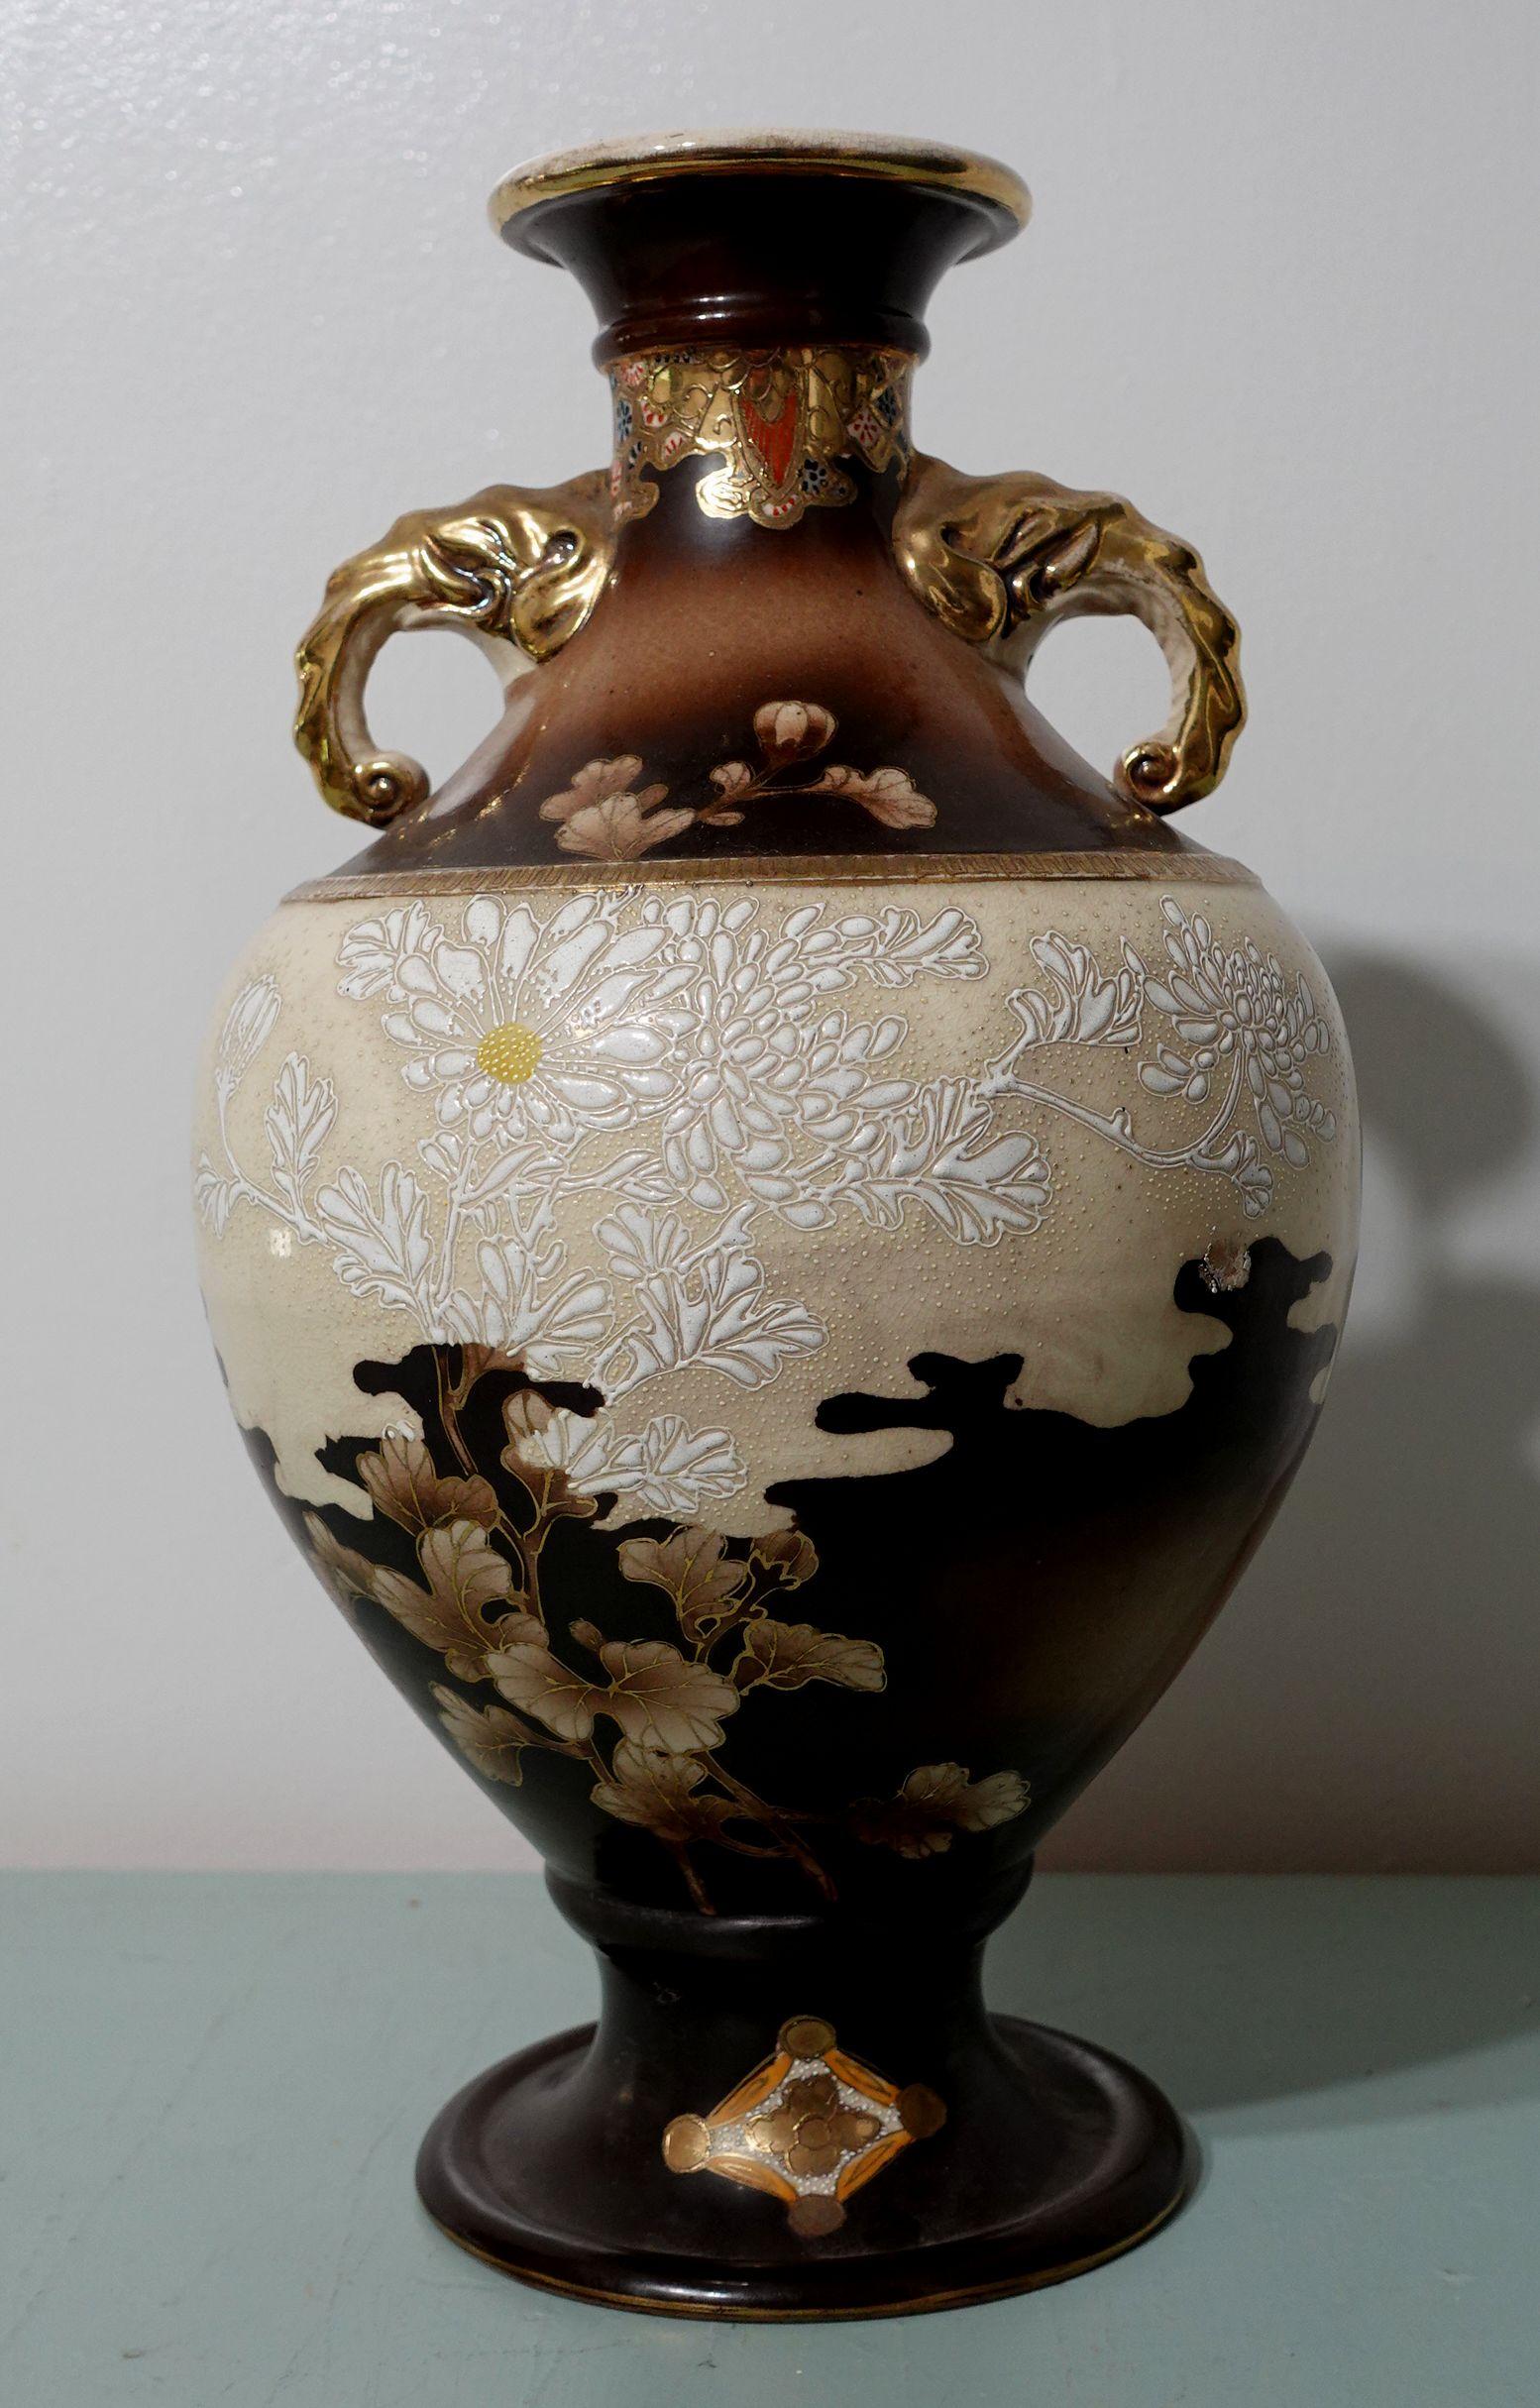 Japan, 20th century
A truly hand-painted with extreme attention and design floral patterns and gilt line work in the urn form and elephant handles. It's signed in the bottom of the rim.
 